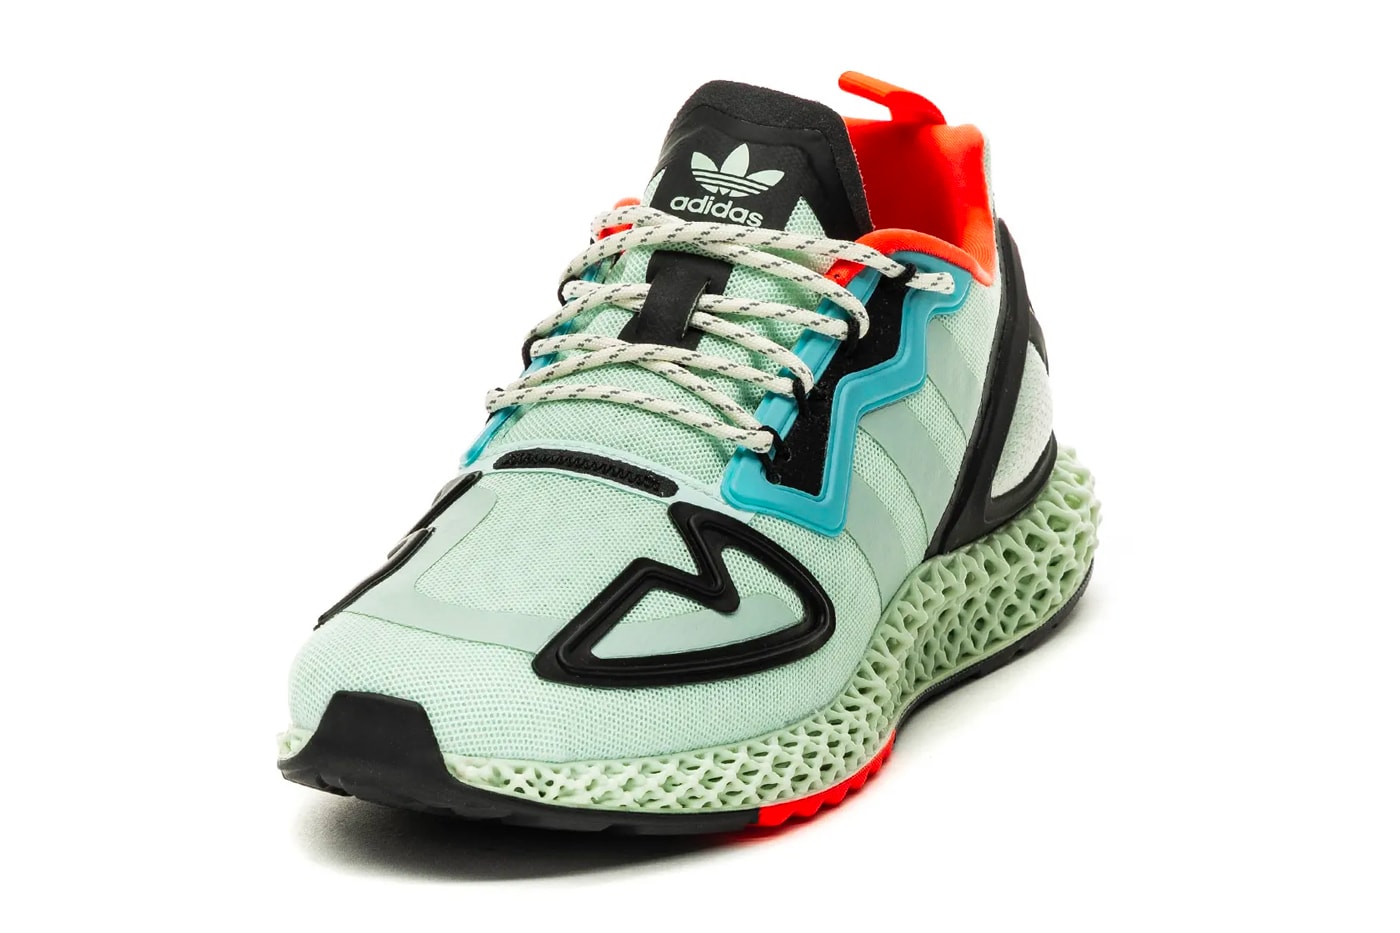 adidas ZX 2K 4D Dash Green FV8500 menswear streetwear spring summer 2020 collection footwear shoes sneakers runners trainers german sportswear lifestyle four dimensional printed midsole dash mint raw FV8500